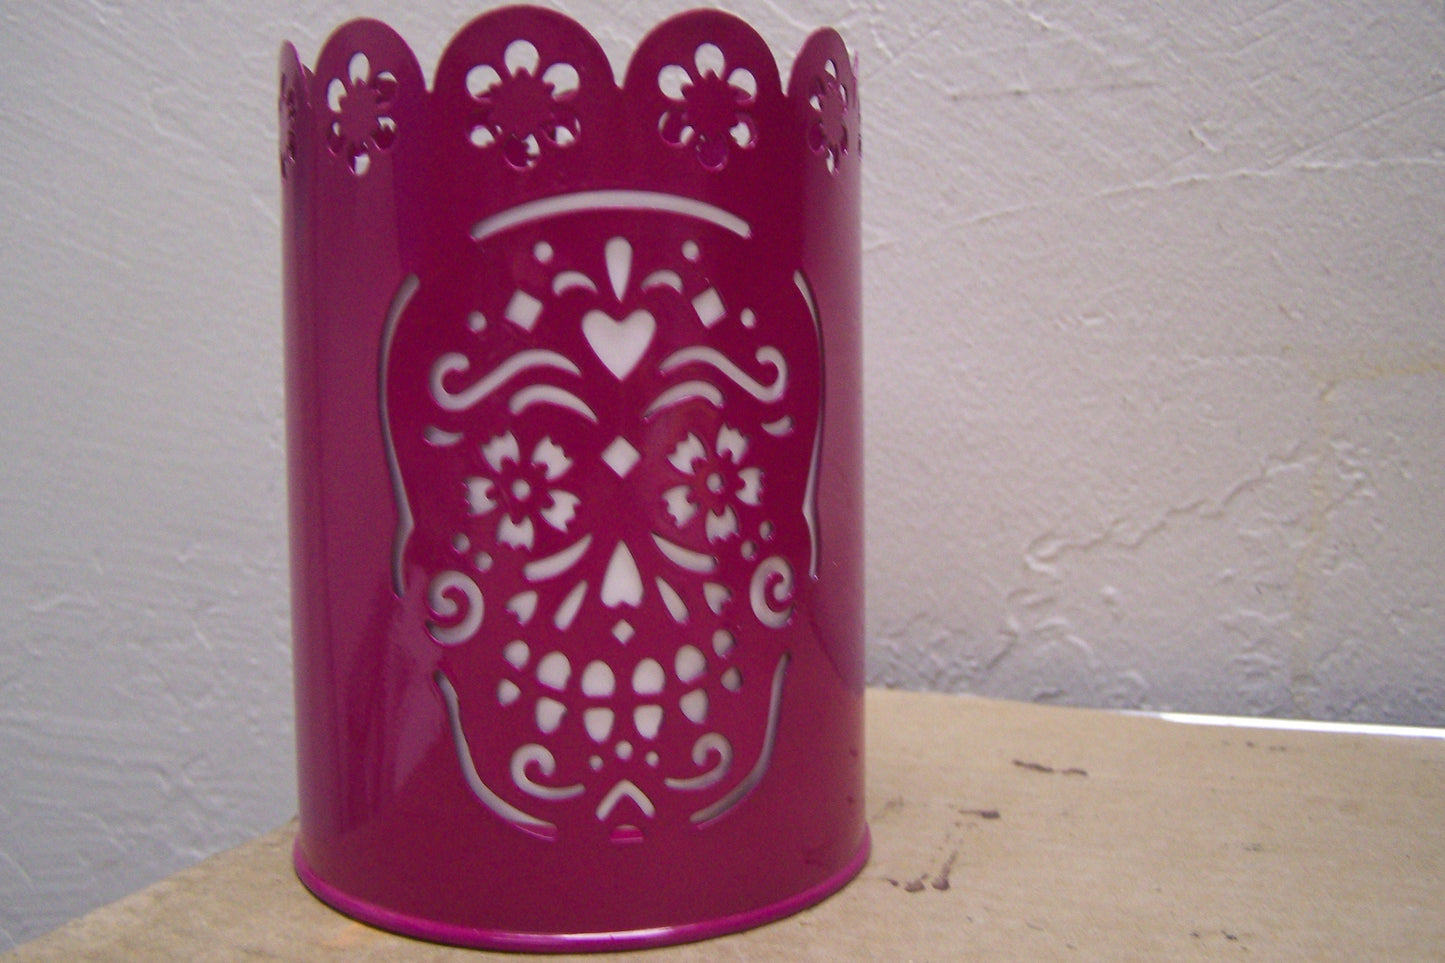 Day of the Dead Punched Metal Luminaria - Sugar Skull Design - Dark Pink